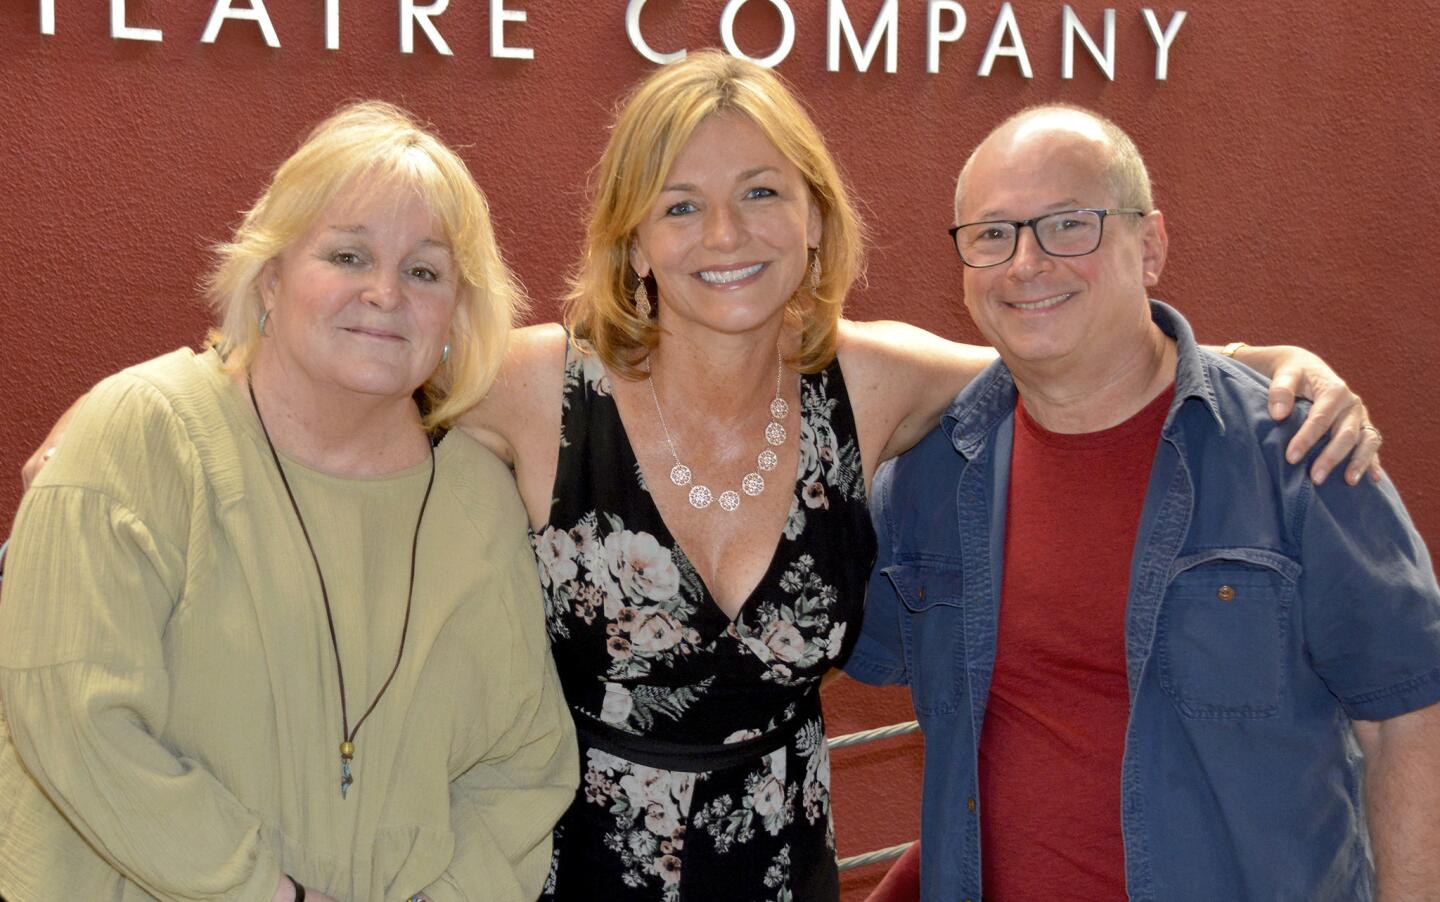 Family Service Agency's Laurie Bleick, left, is welcomed to the Colony Theatre for last week's presentation of "Manecdotes" by Suzanne Weerts and Steve Rosen.